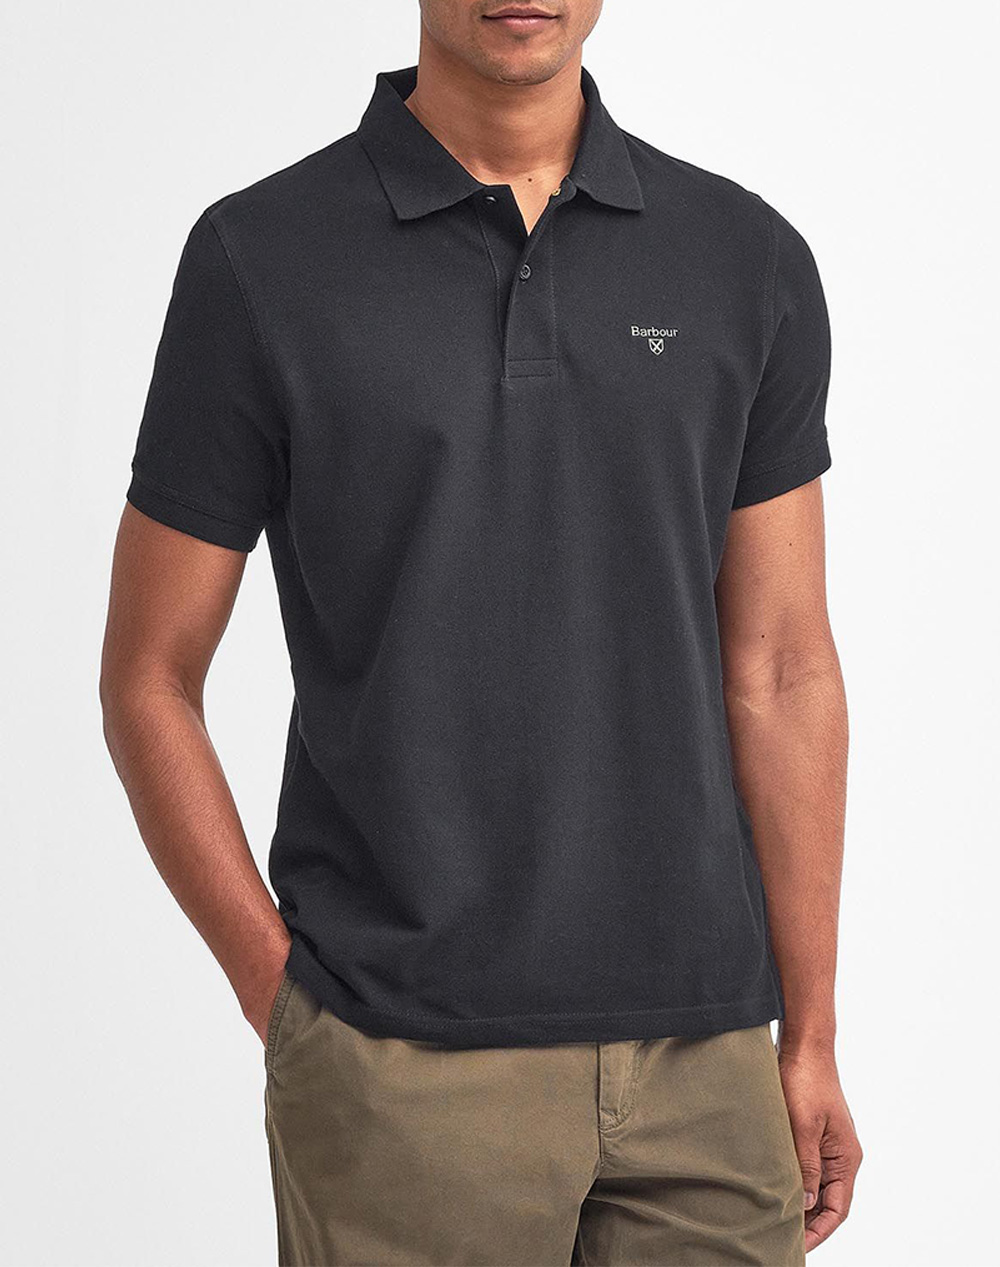 BARBOUR BARBOUR LIGHTWEIGHT SPORTS POLO ΜΠΛΟΥΖΑ POLO MML1367-BRBK31.2 Black 3820ABARB3410029_XR28556